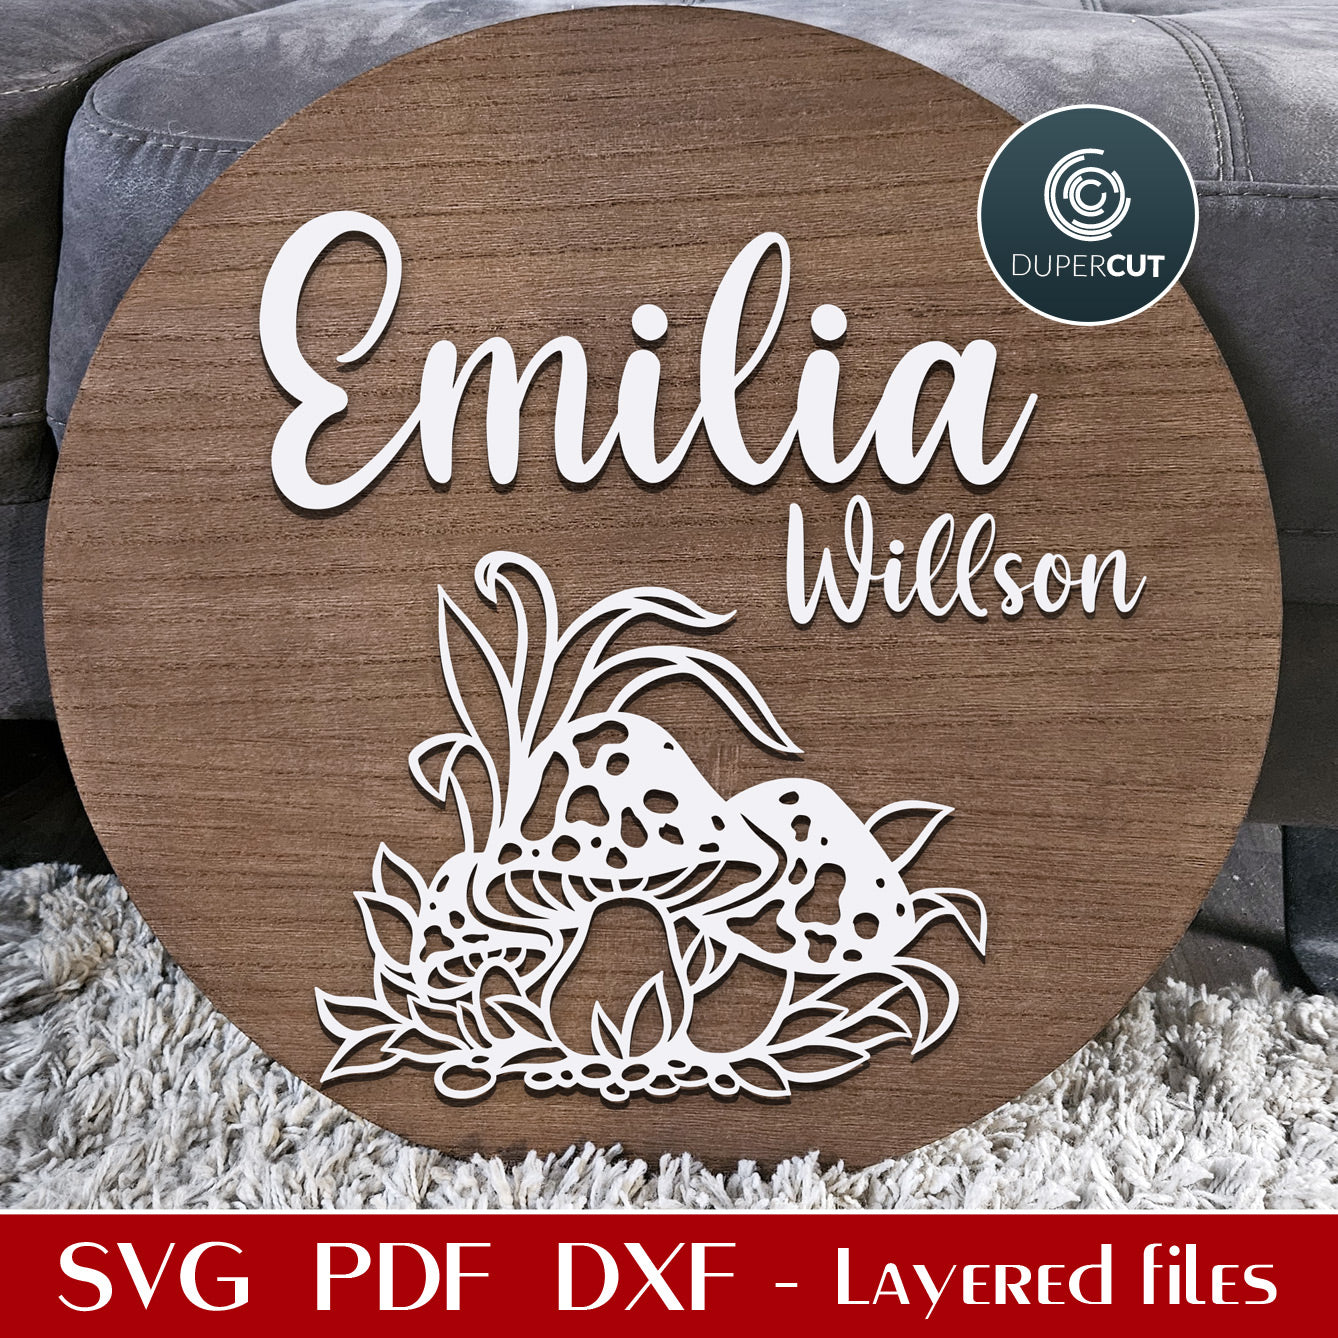 Nursery round name sign, cute mushrooms floral theme rose wall decor for girls - SVG layered personalized file laser cut template for Glowforge, Xtool, Cricut by www.DuperCut.com